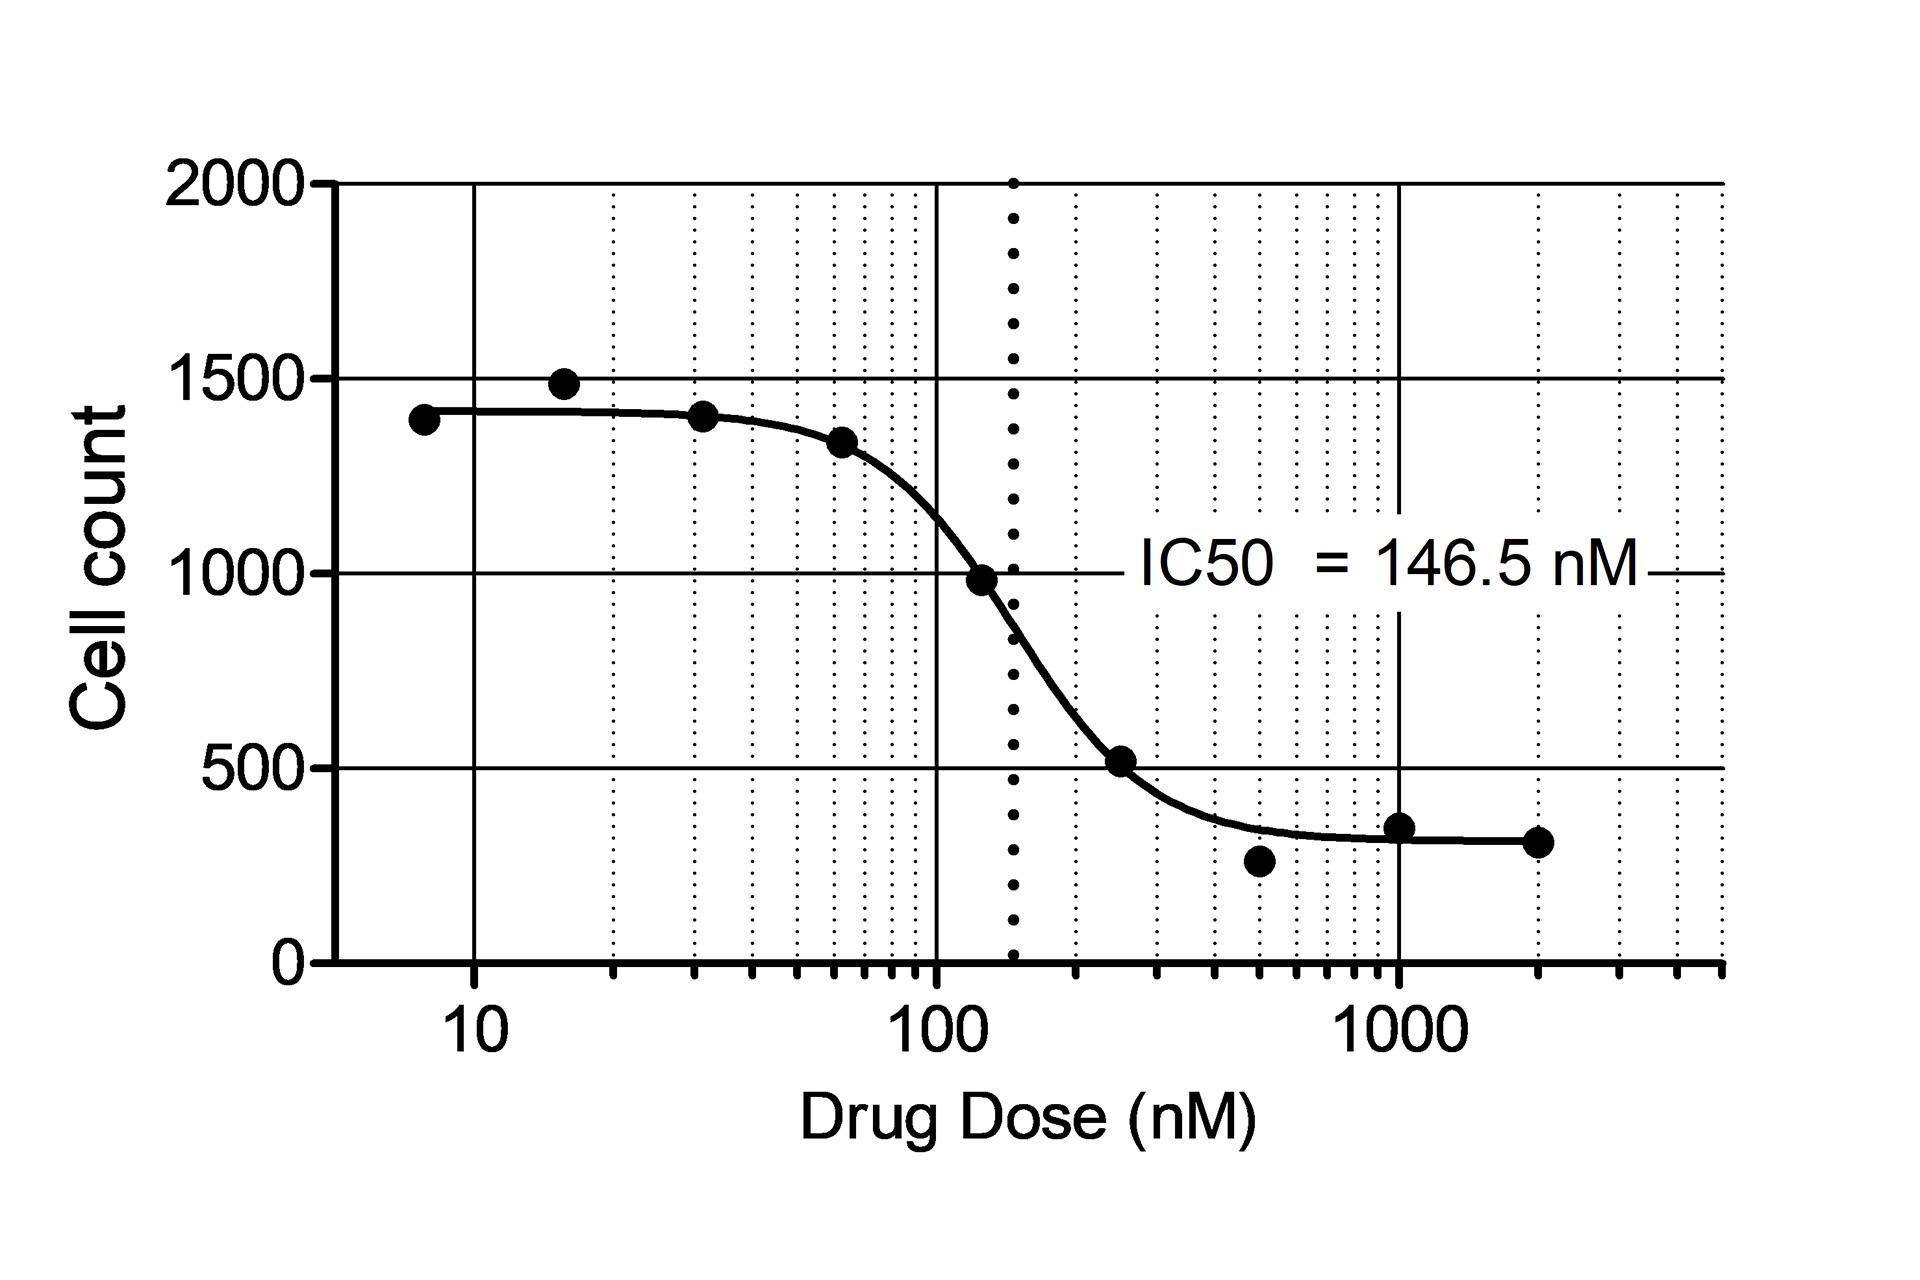 Figure 3D: Dose-response curve with logarithmic scale